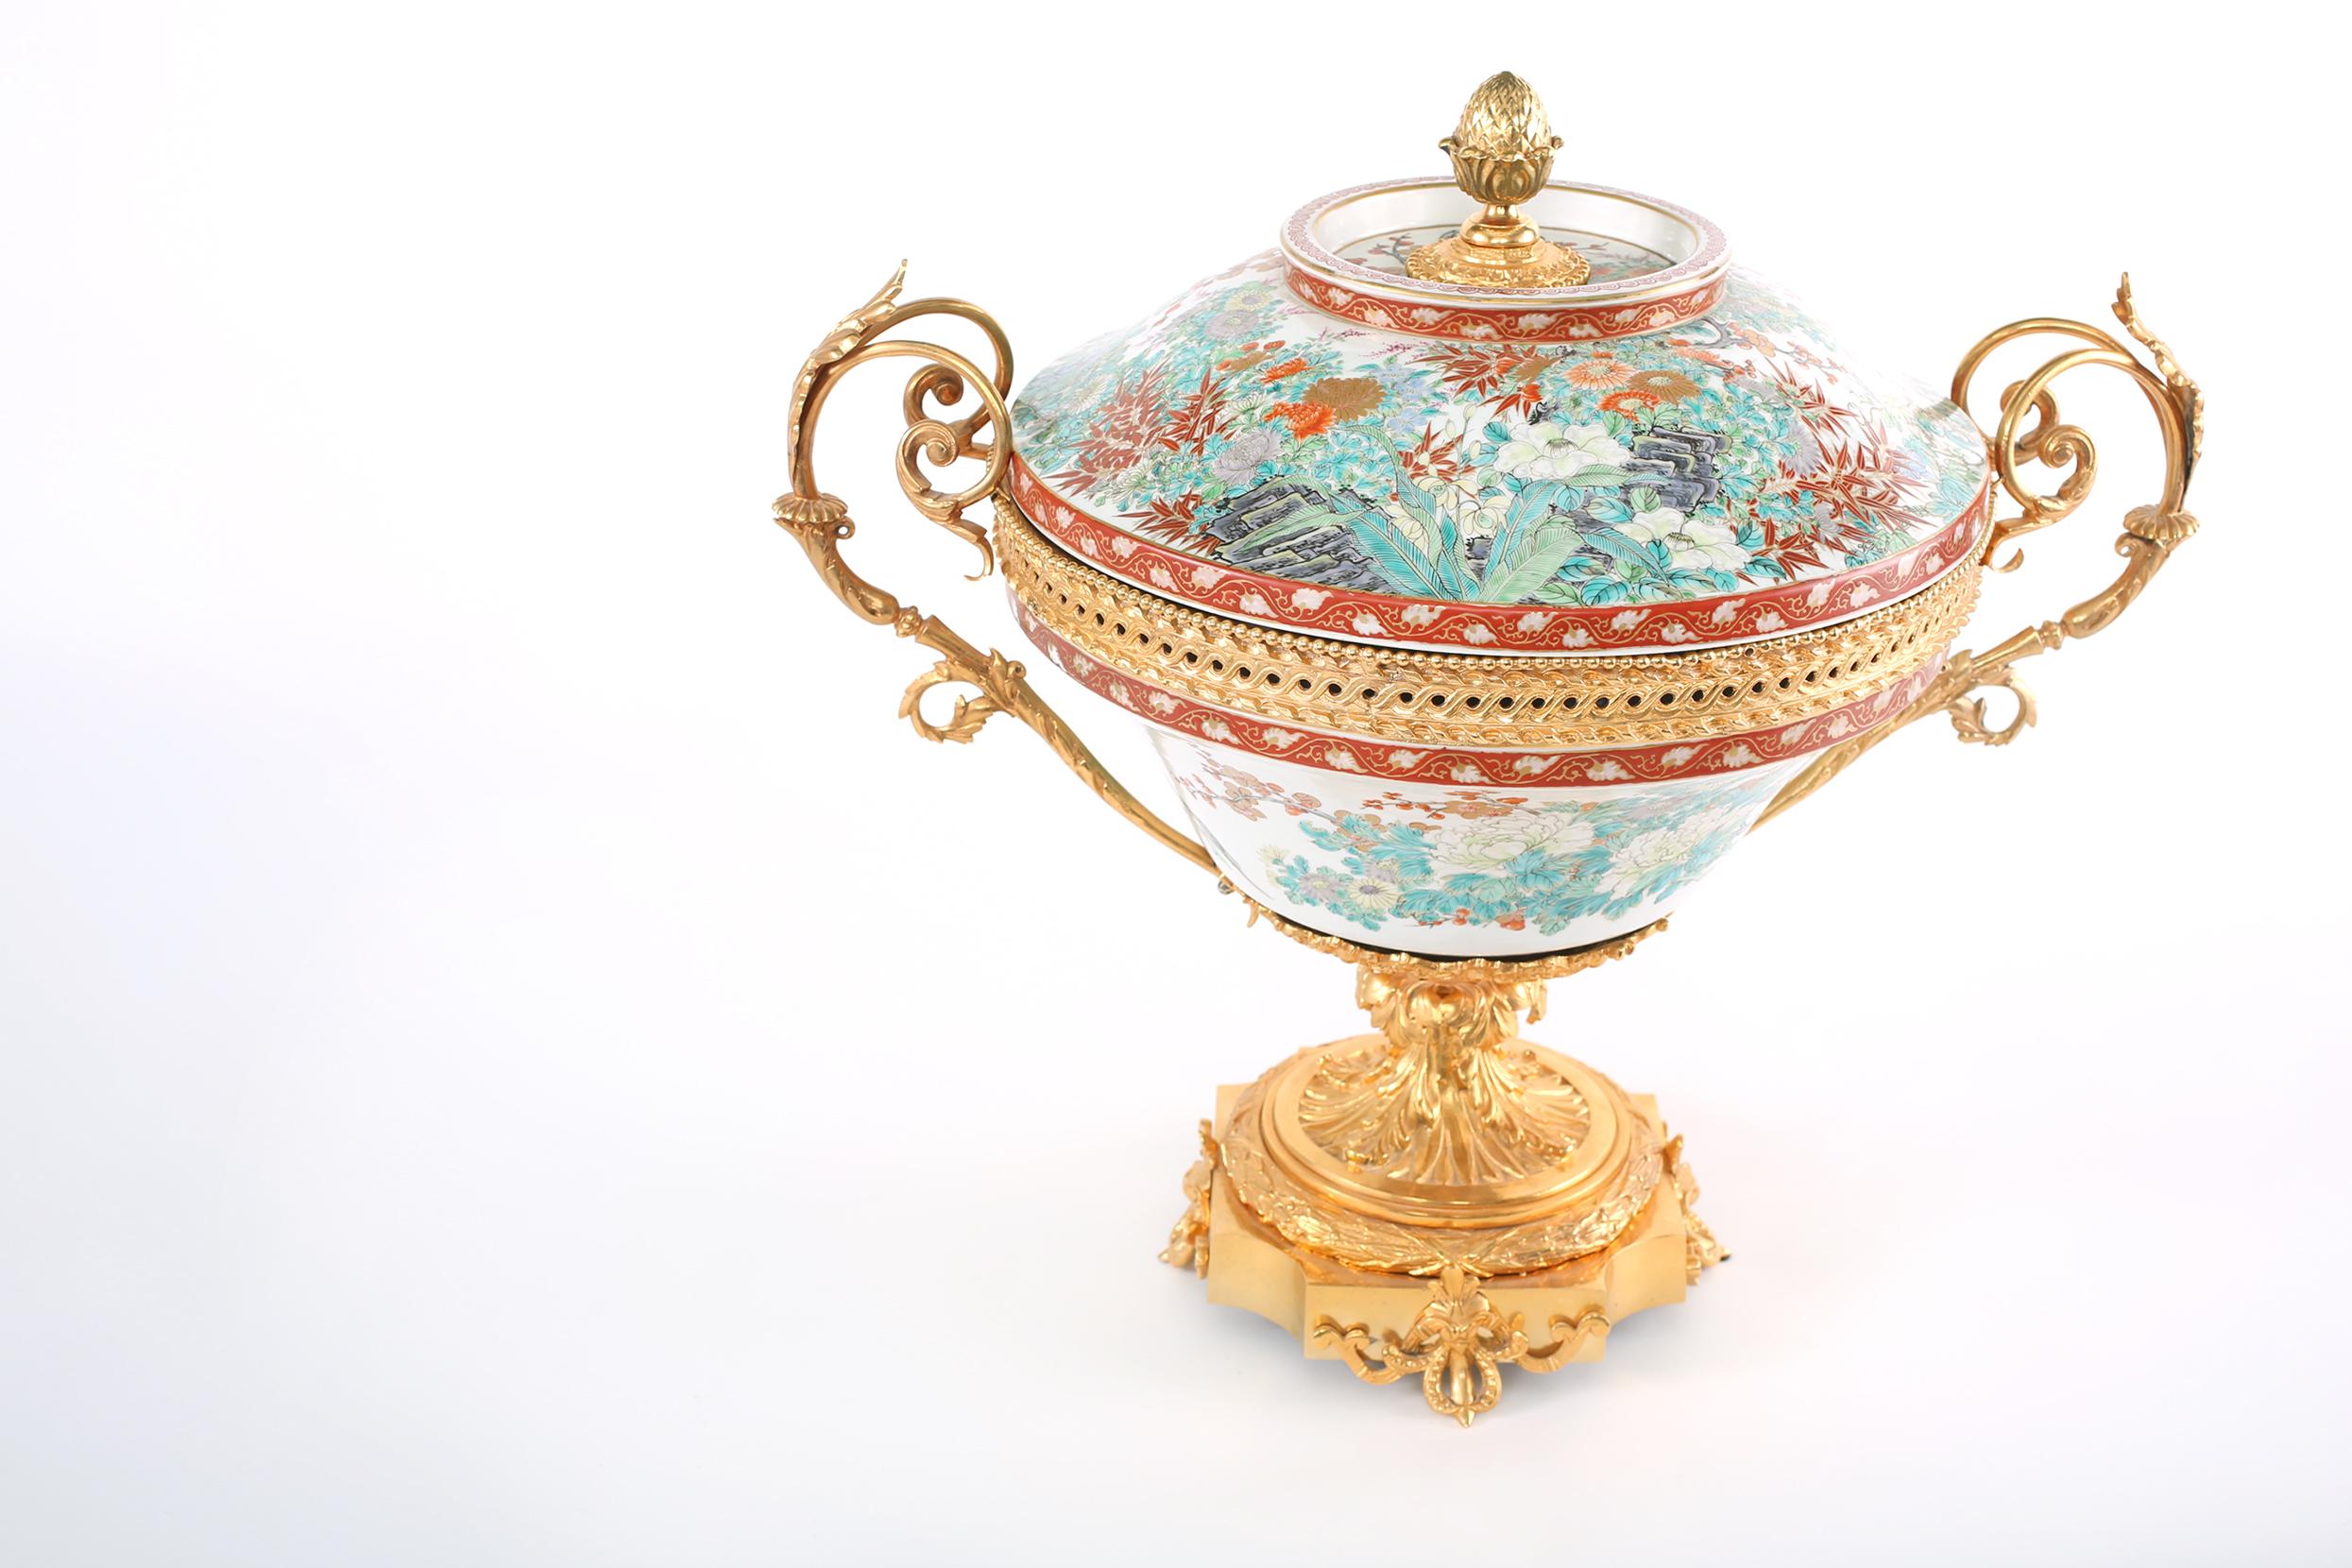 Large gilt bronze mounted framed / Imari porcelain covered decorative centerpiece with side handles. The centerpiece bowl stands about 24.5 inches wide 